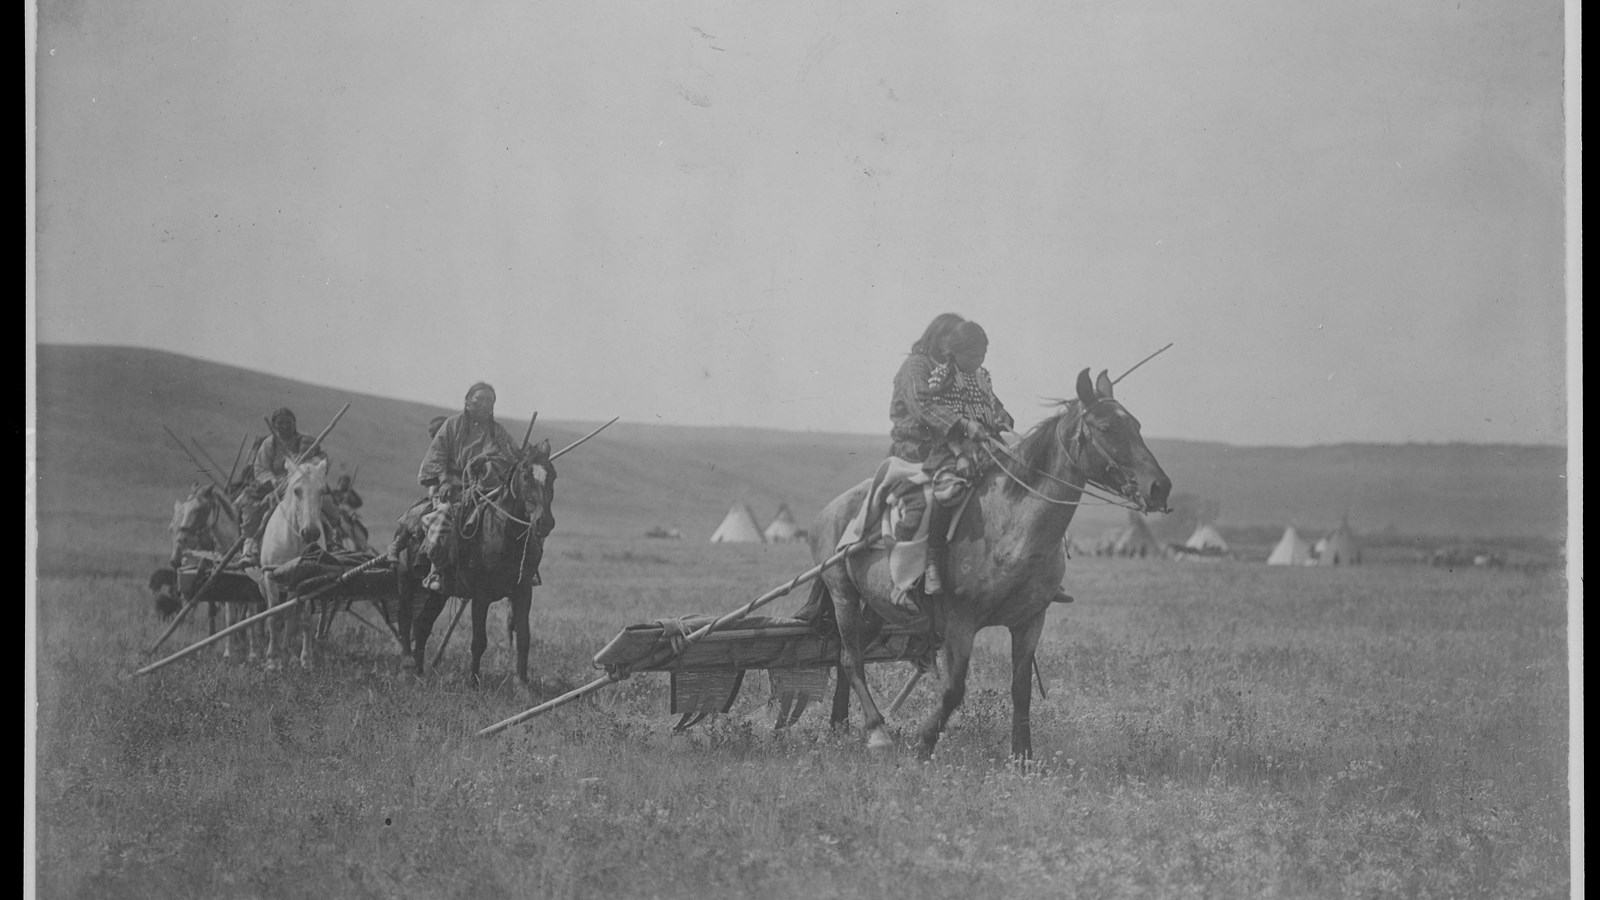 Line of people riding horses on the plains, carrying small loads behind them. Child sitting in front